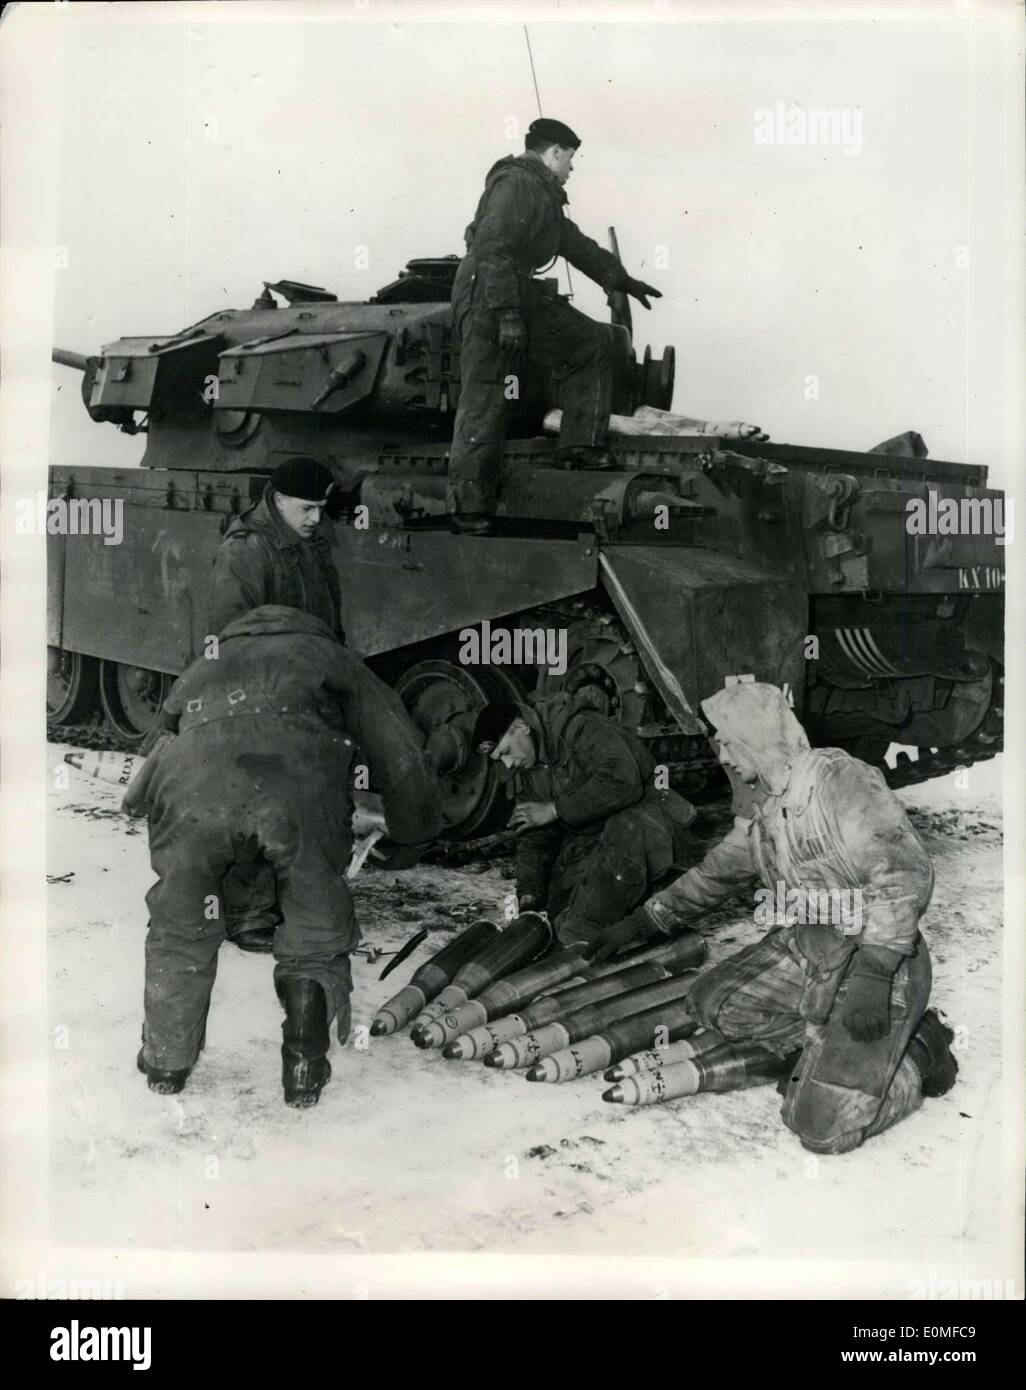 Feb. 05, 1955 - Tank Battalion Under Training At Belsen-Hohne Germany: The 1st. Squadron of the 4th. Heavy Tank Battalion 1st. Netherlands Corps came from Holland by trains for training at the B.A.O.R. Tank Gunnery Range at Belsen-Hohne, Germany recently. They were replaced by another squadron of their battalion. This B.A.O.R. Range is the largest in Europe and is used by armoured units from many N.A.T.O. Nations. Photo shows Checking ammunition for 1st. detail during the second days firing. Stock Photo